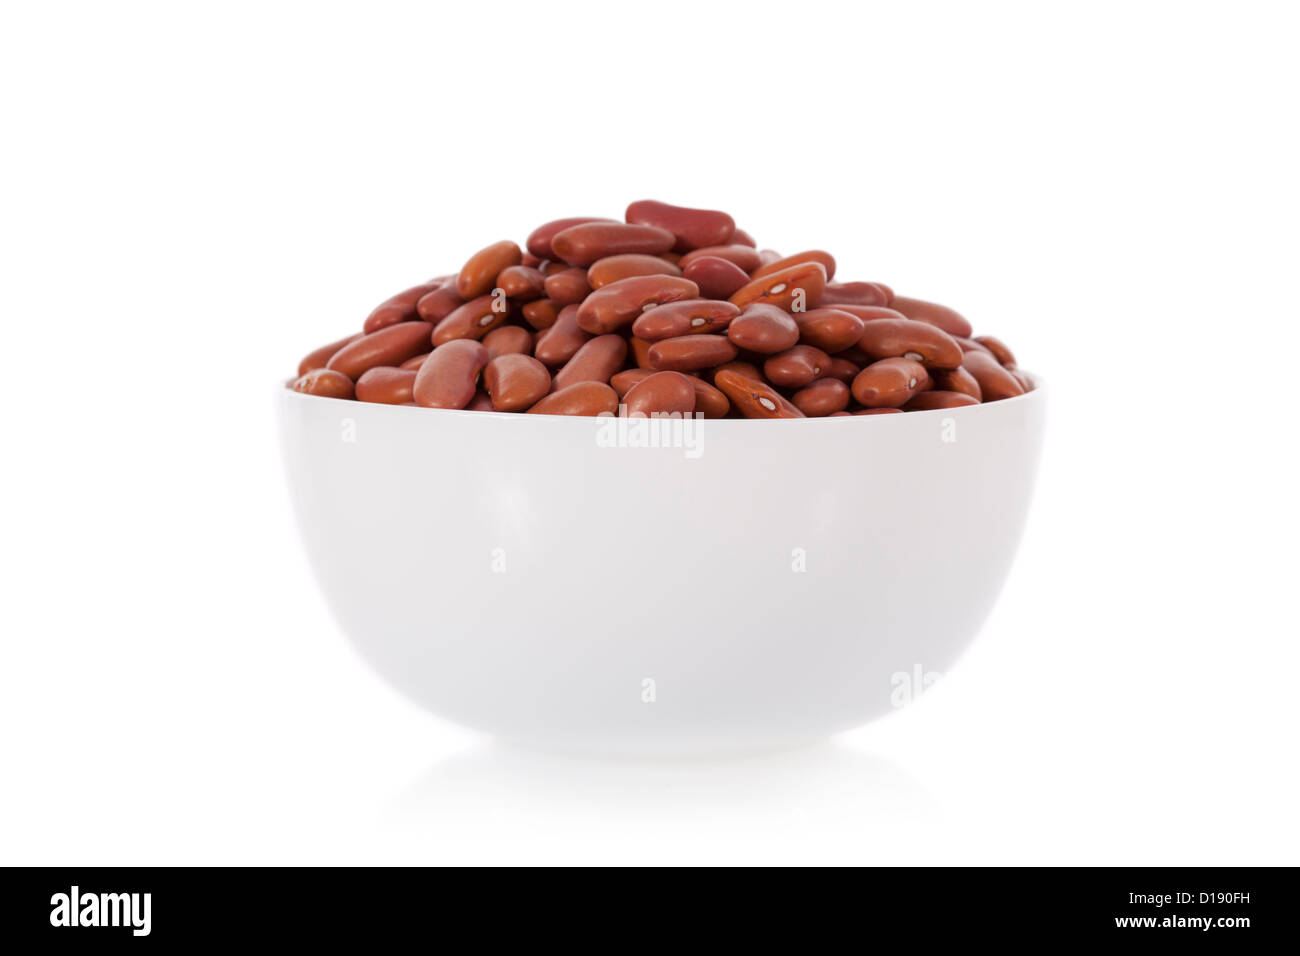 Red kidney beans in a bowl isolated on a white background Stock Photo